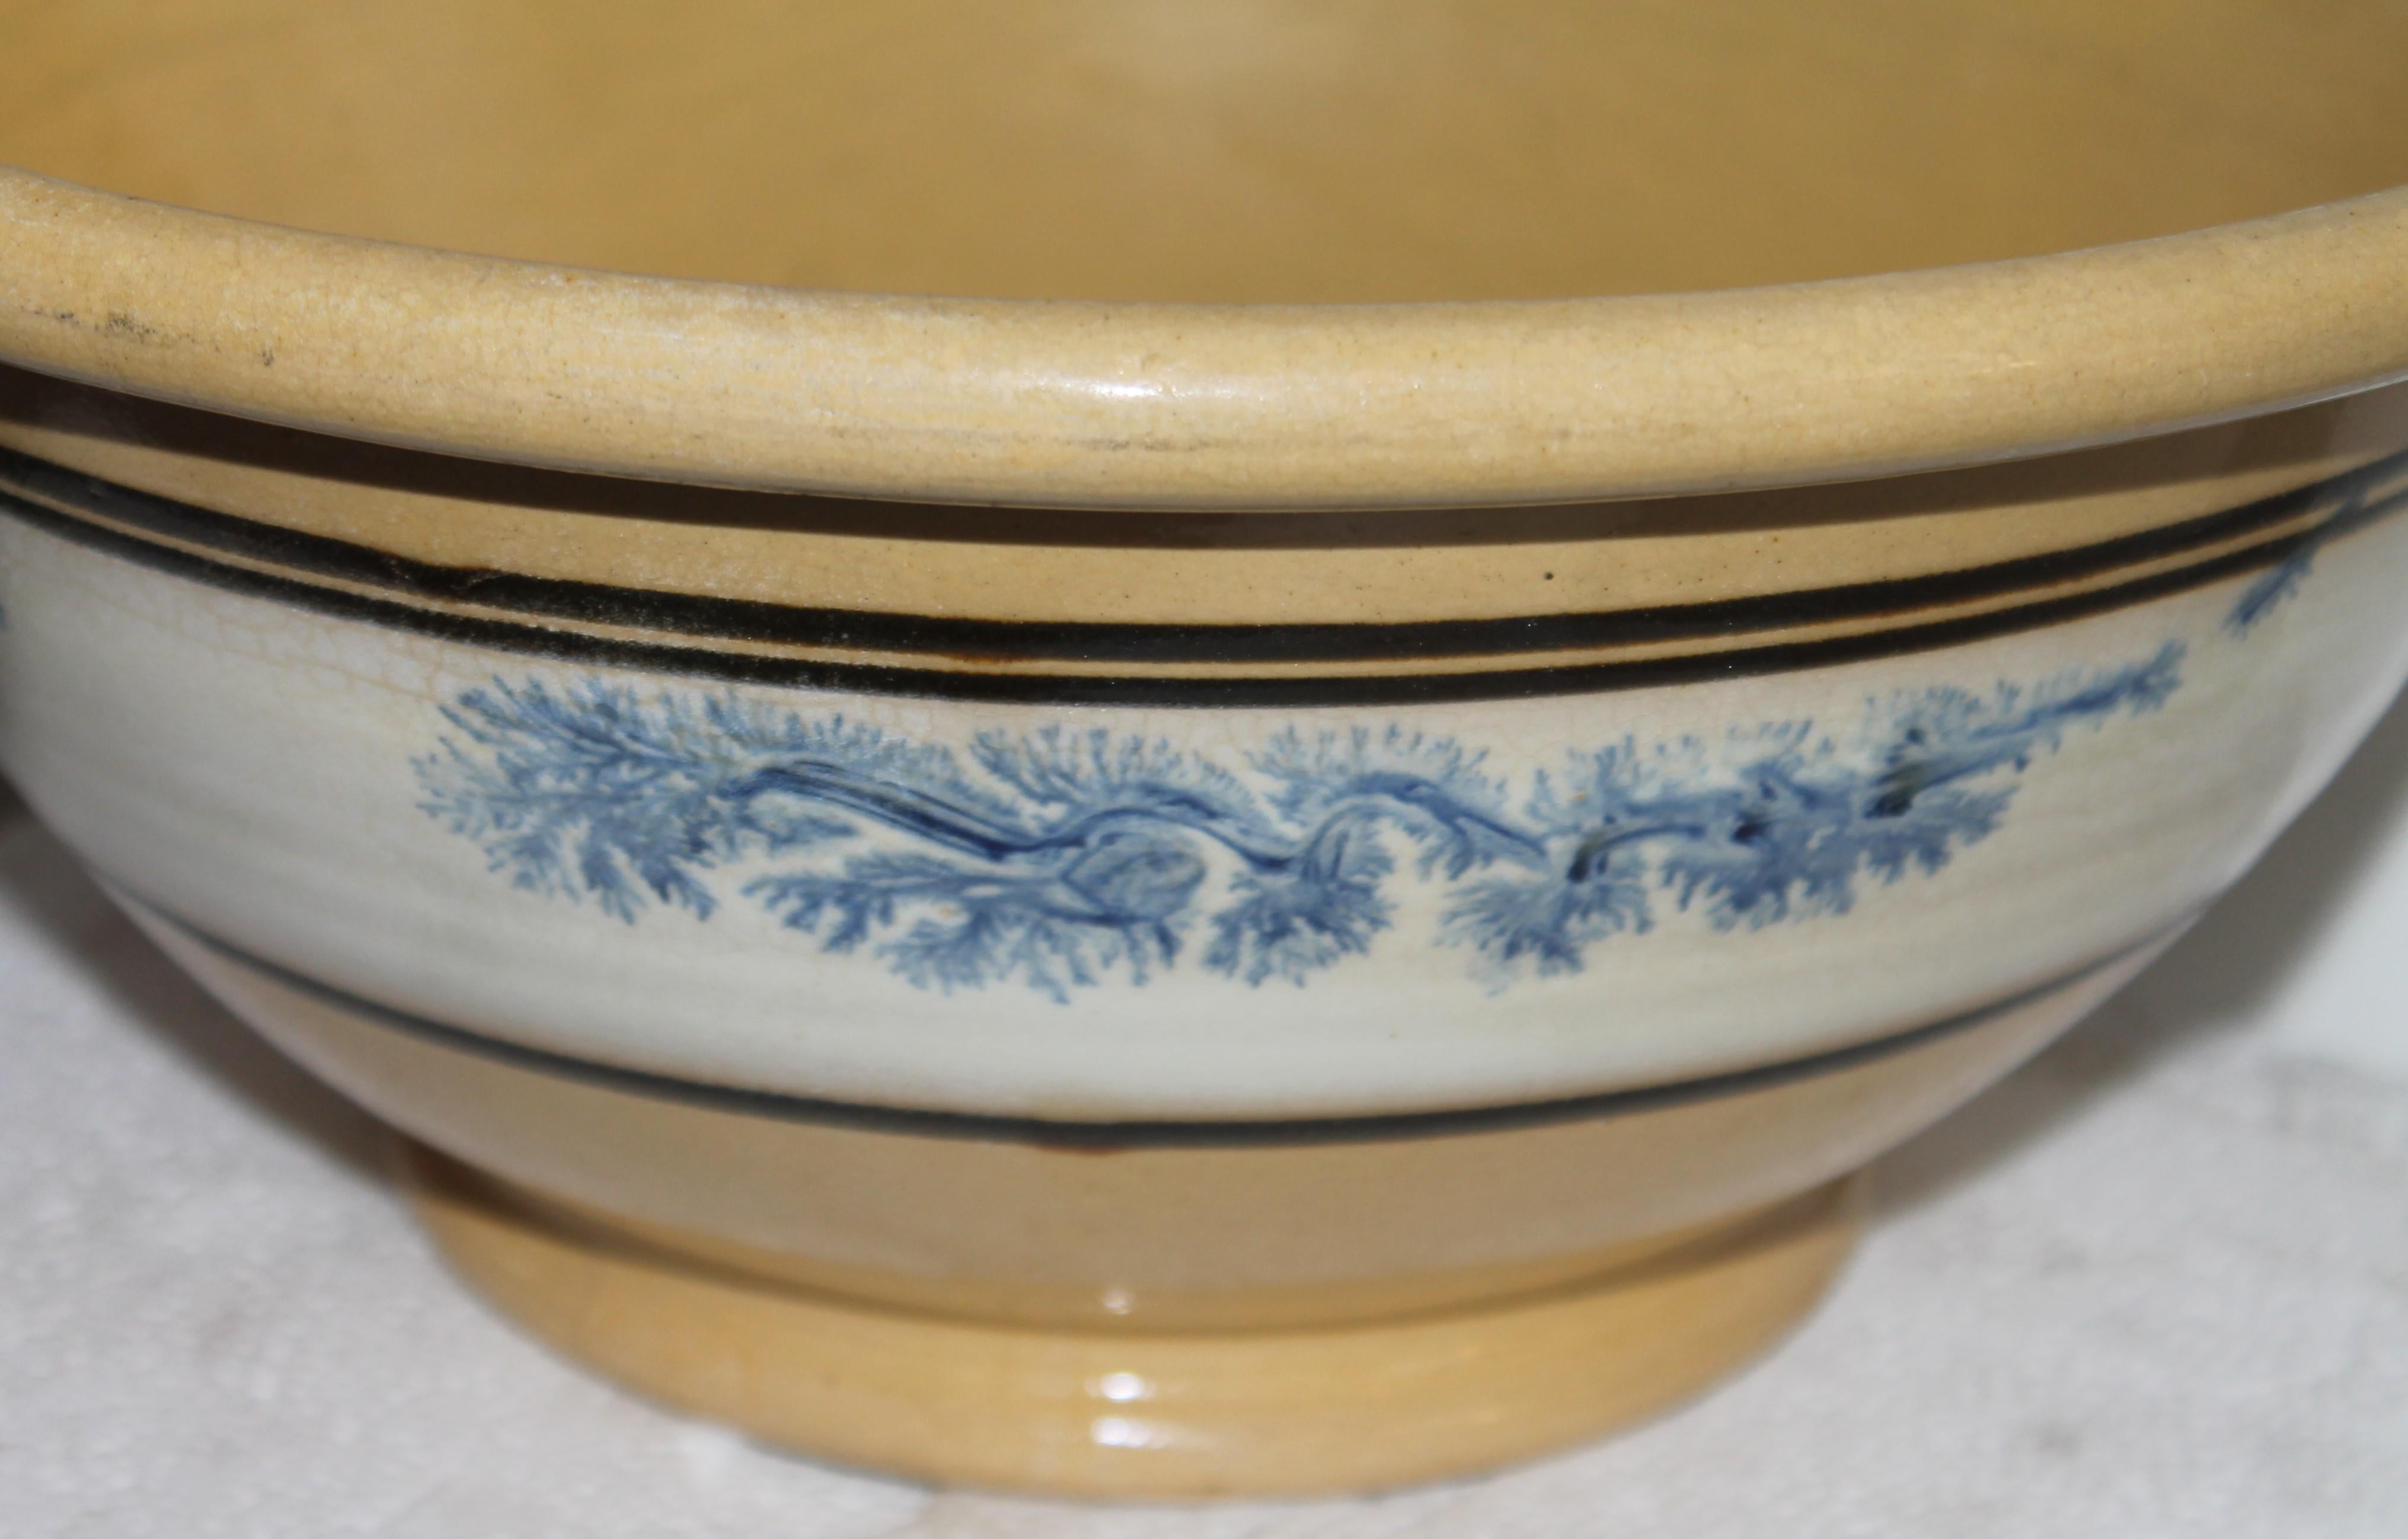 This fine very large Mocha Yellow ware bowl with the blue seaweed pattern throughout.